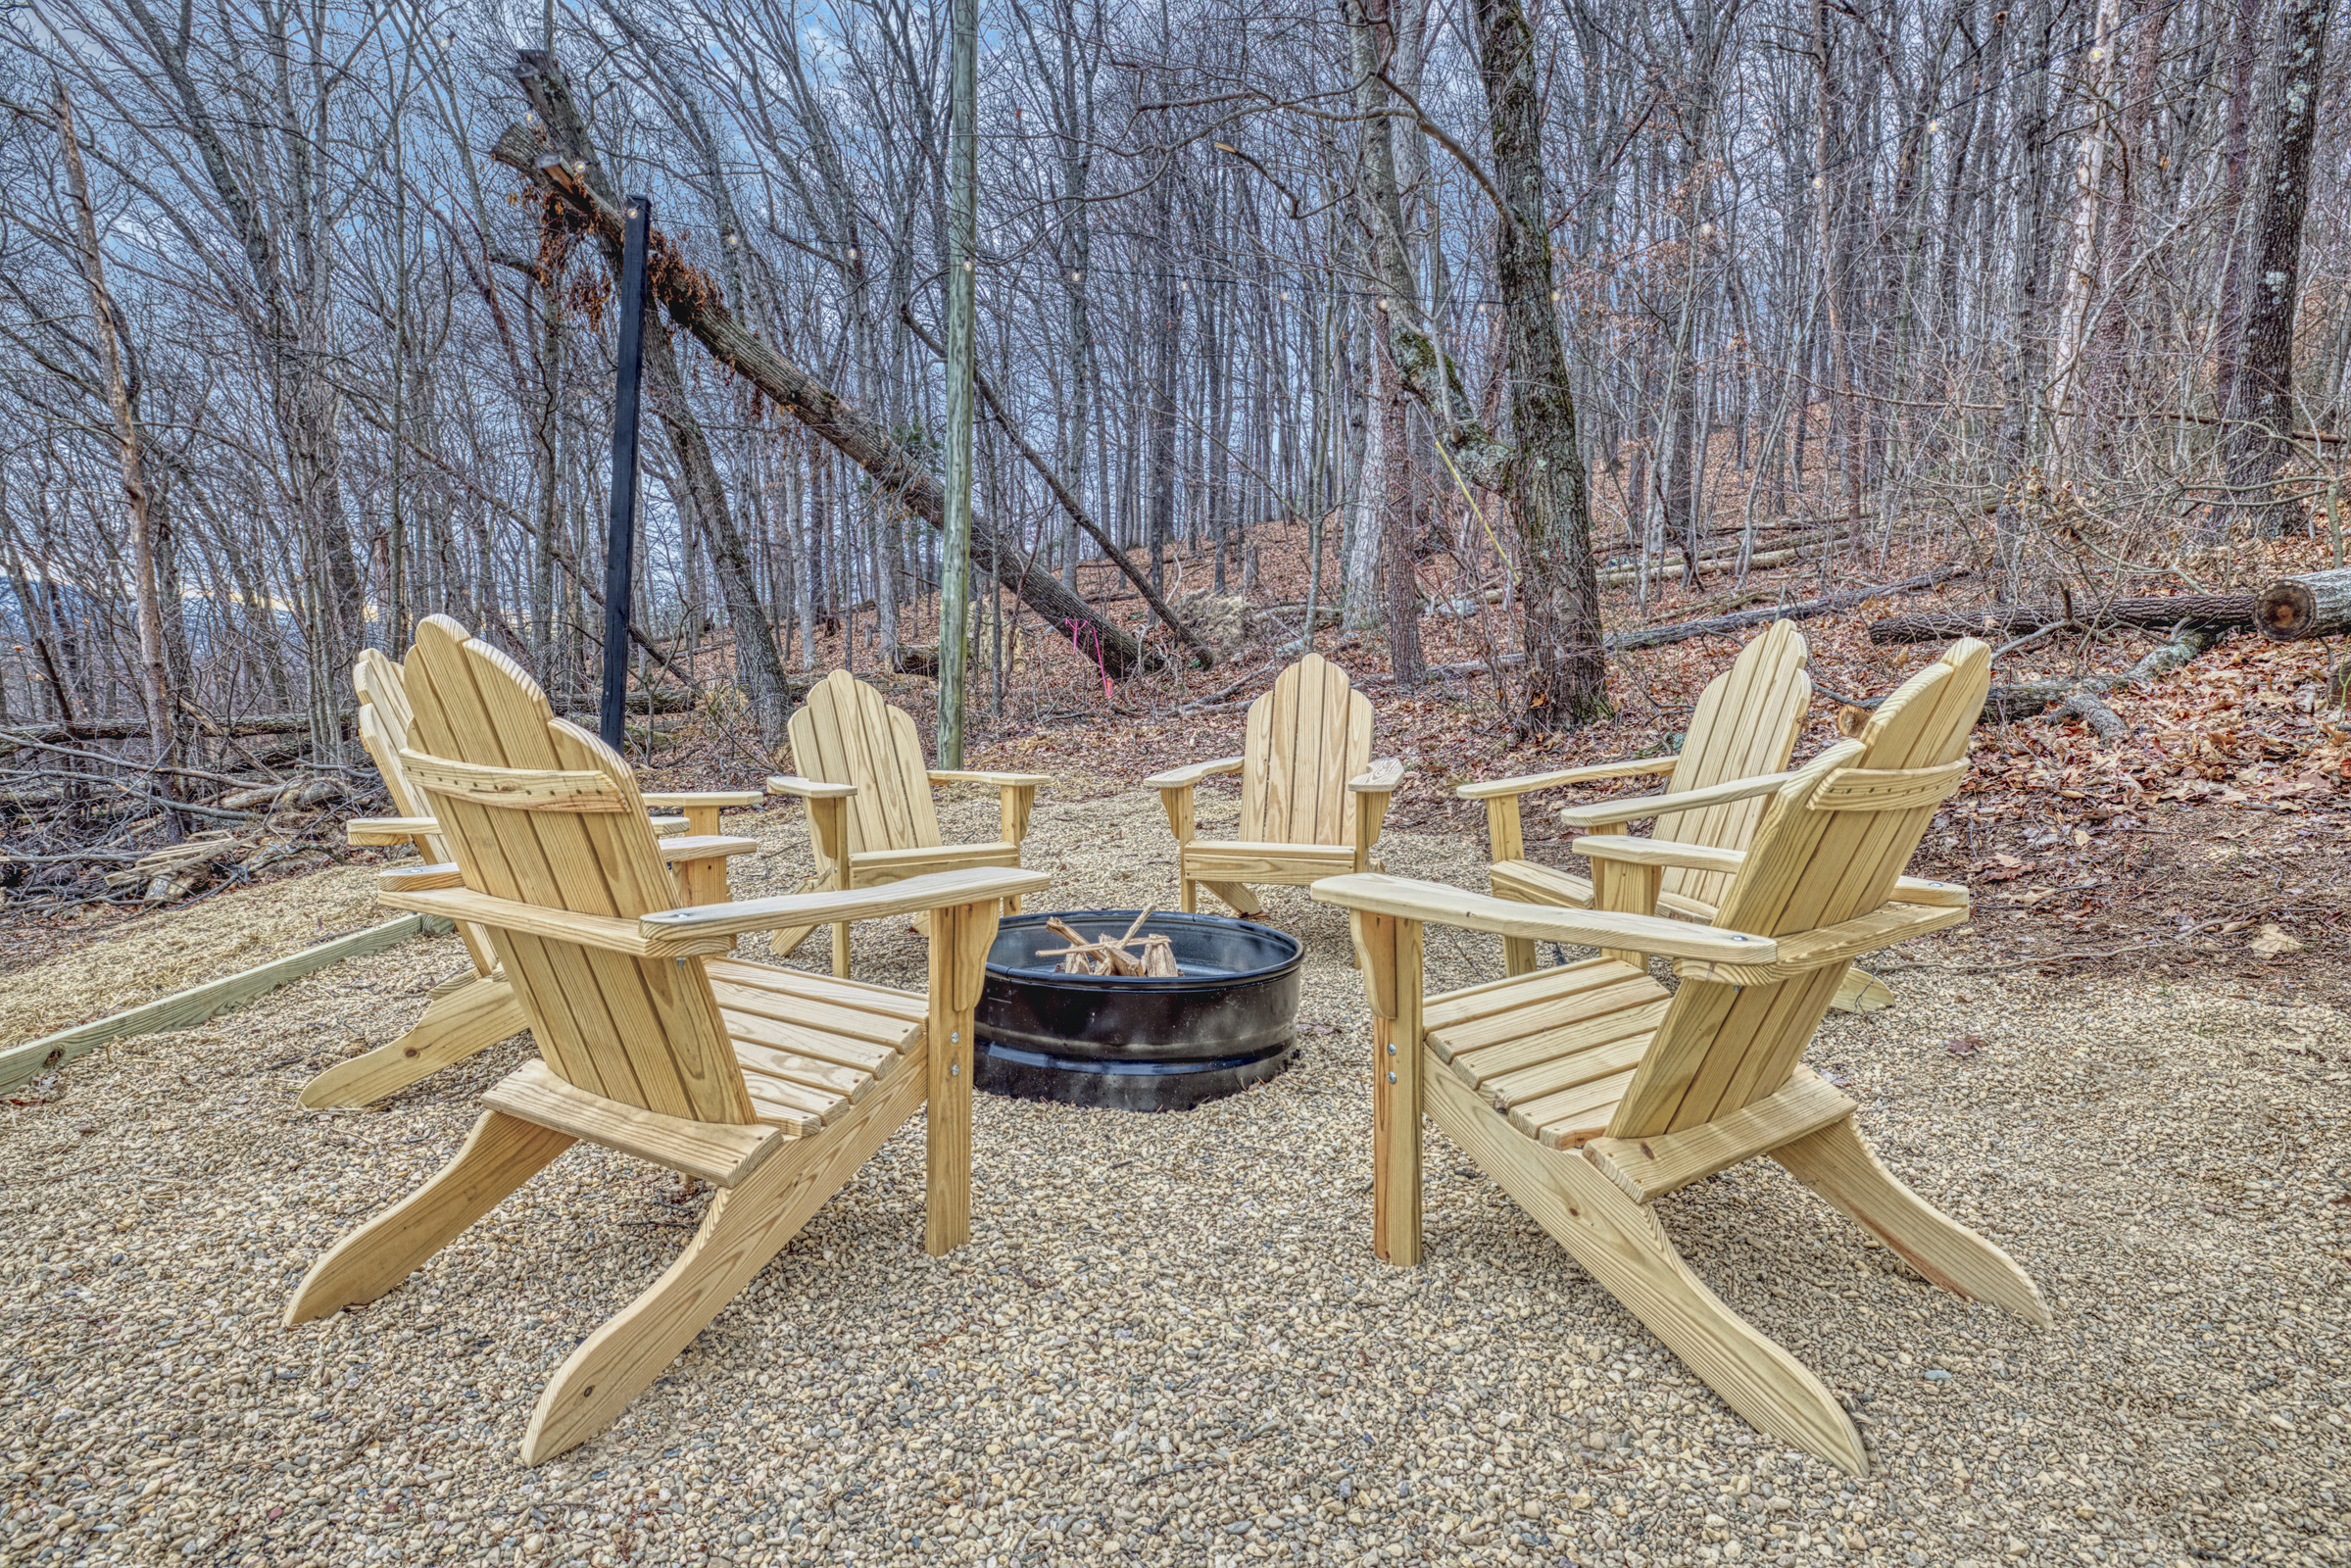 Professional exterior photo of 540 Pine Knob Road in Stanley, VA - showing fire pit and 6 adirondack chairs